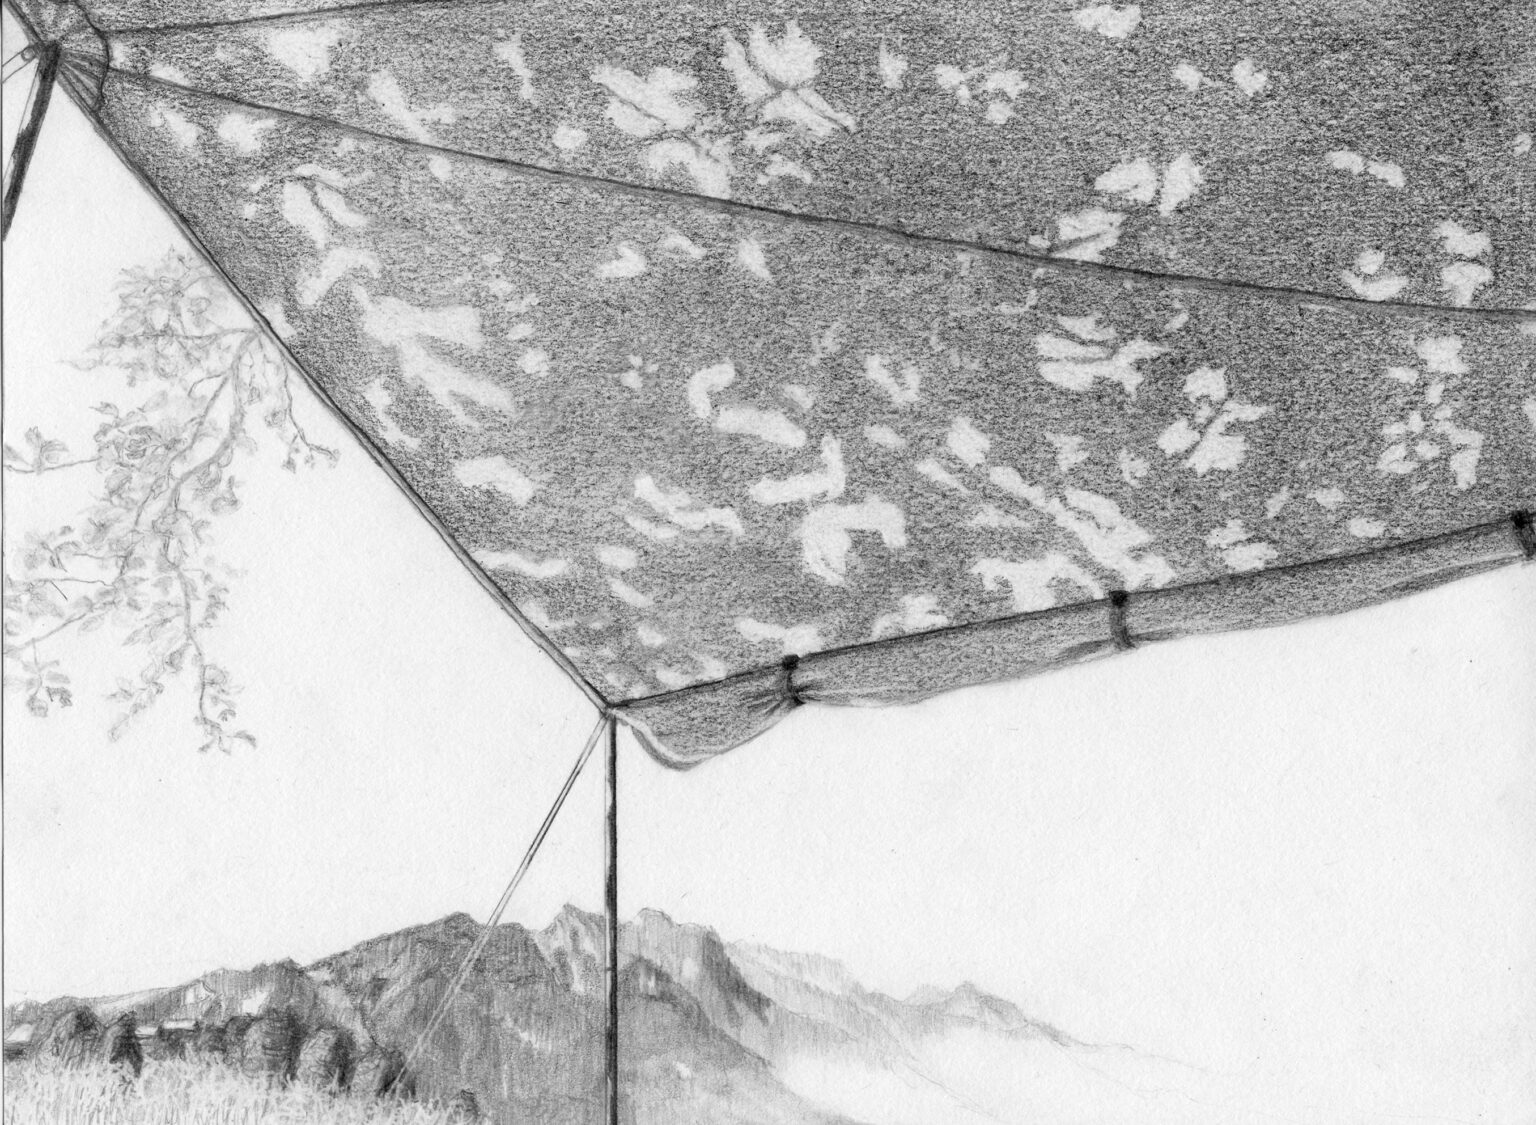 Holiday tapestry 3, pencil on paper, 21x29cm, 2022